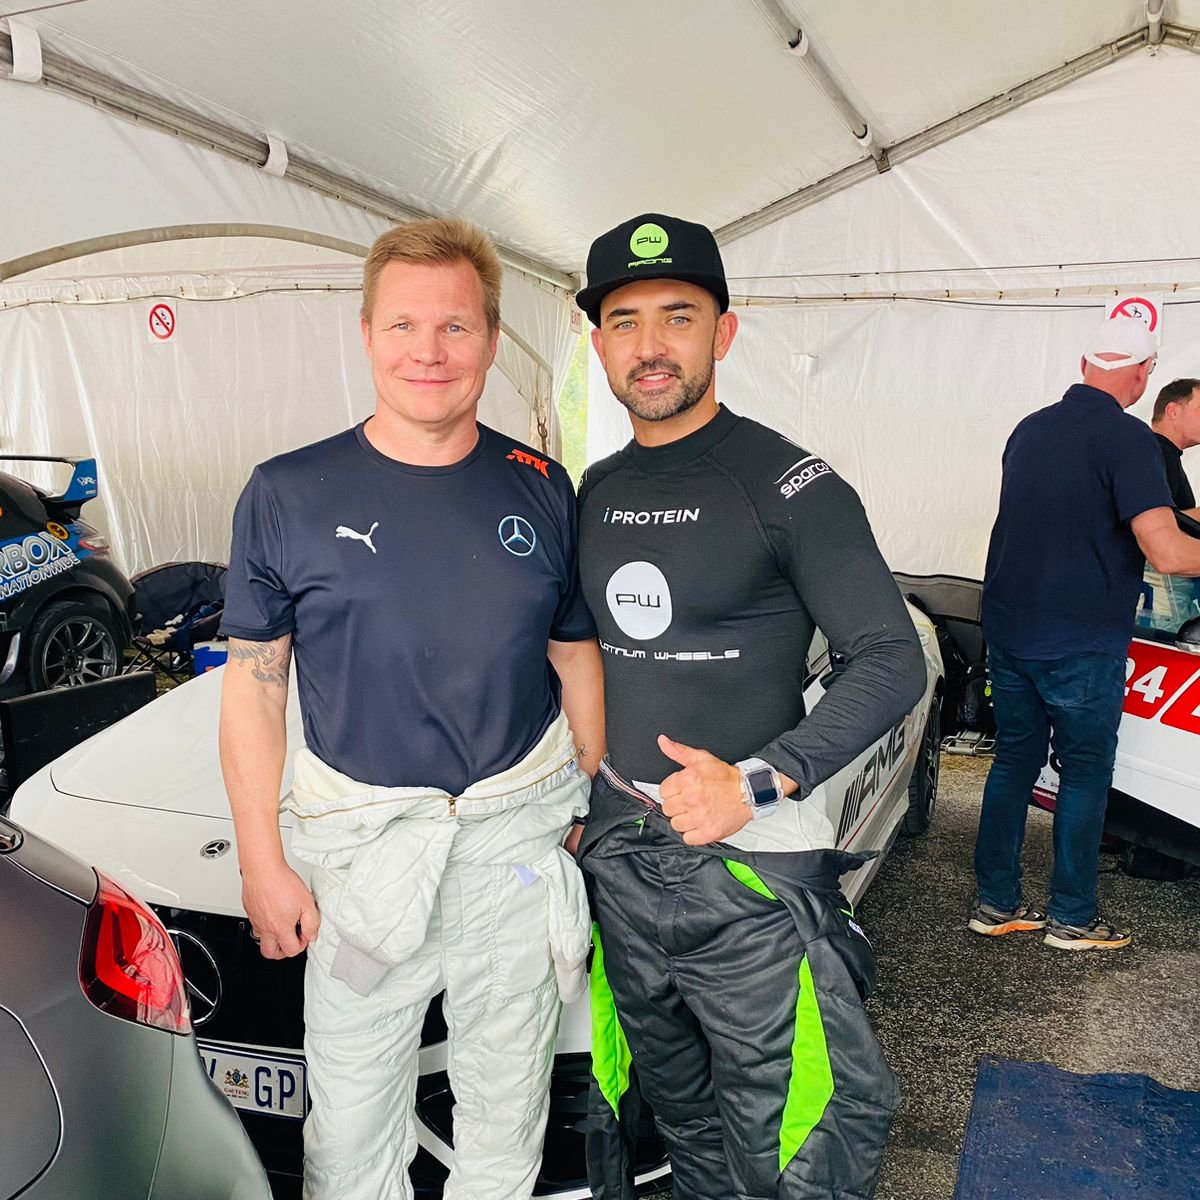 Perhaps one of the best experiences @SpeedFestivalCX this weekend was to share the track with these racing legends
@Petter_Solberg 
@HenningSolberg 
Mika Salo

#Honoured #Racing #SimolaHillclimb @vdwalt1